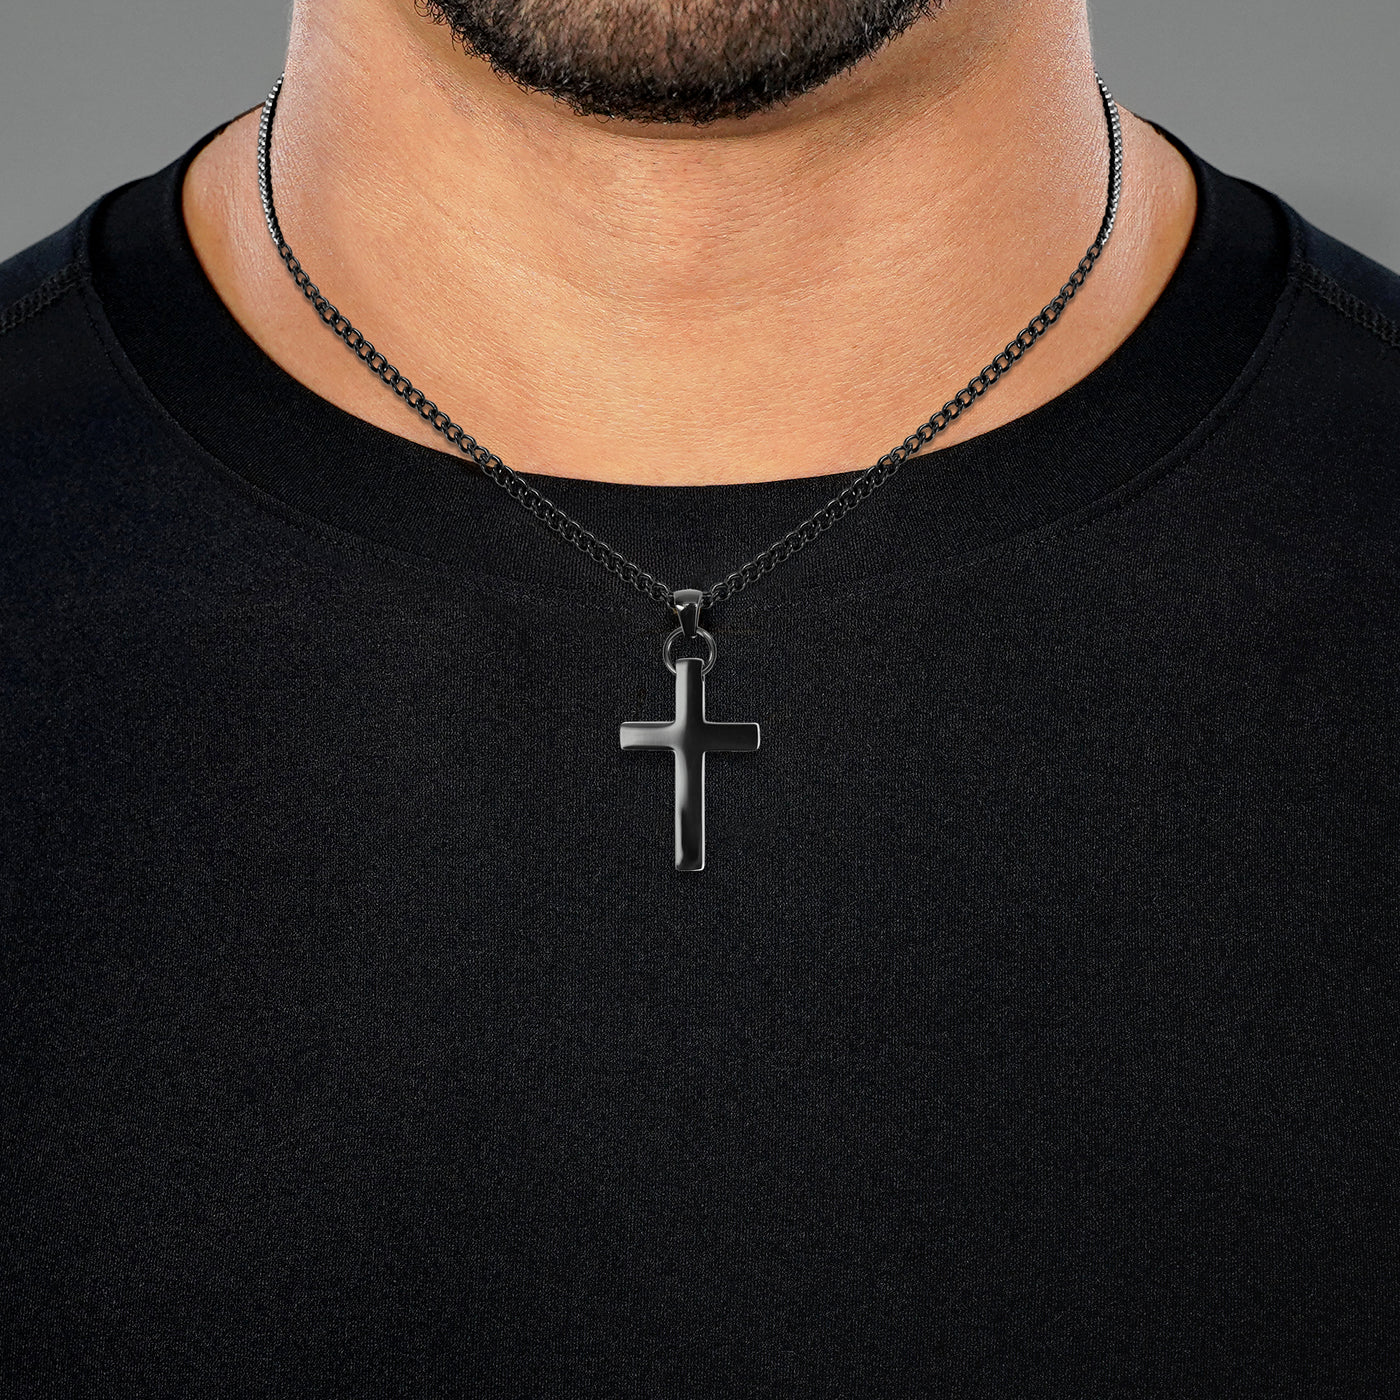 Faith Cross Pendant with Chain Necklace - Black Stainless Steel